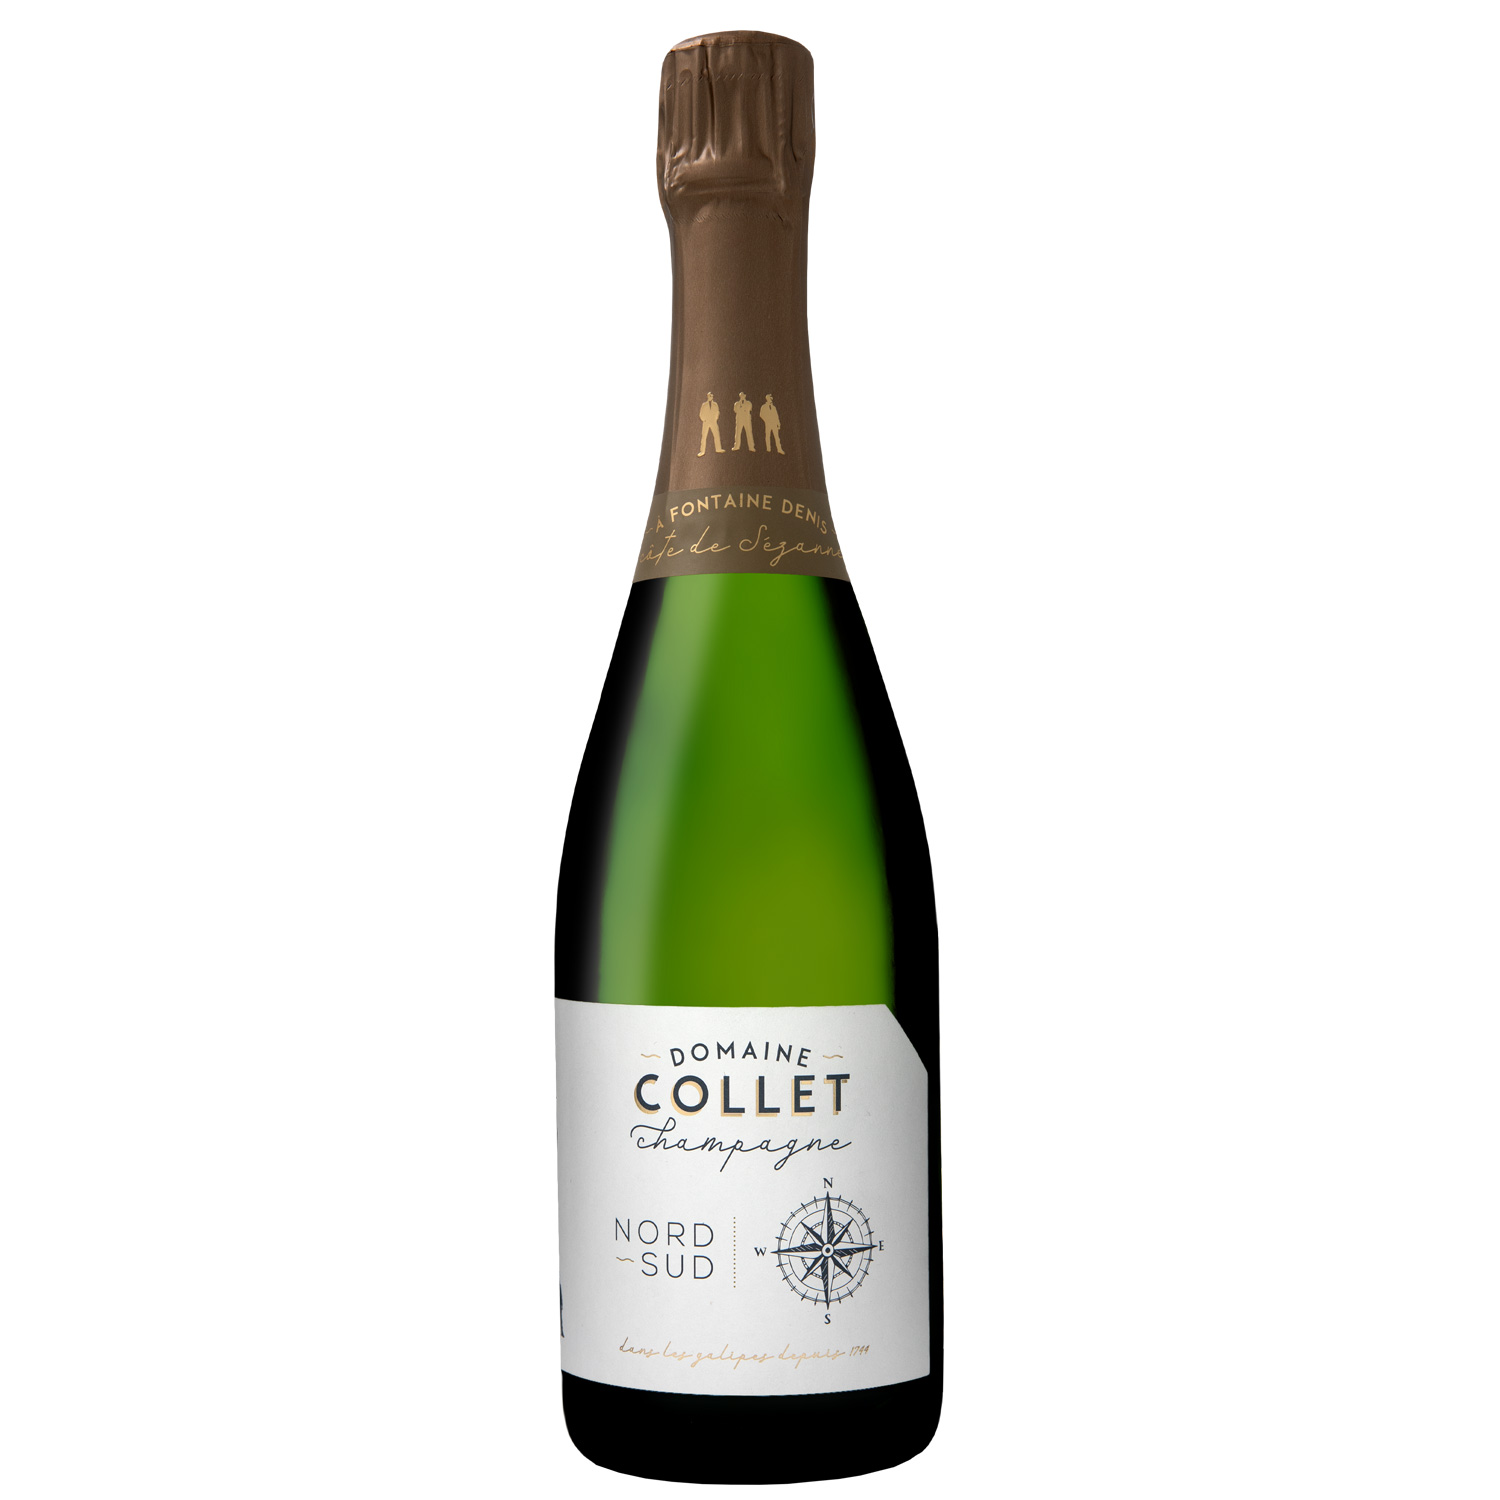 Domaine Collet Champagne: Nord-Sud